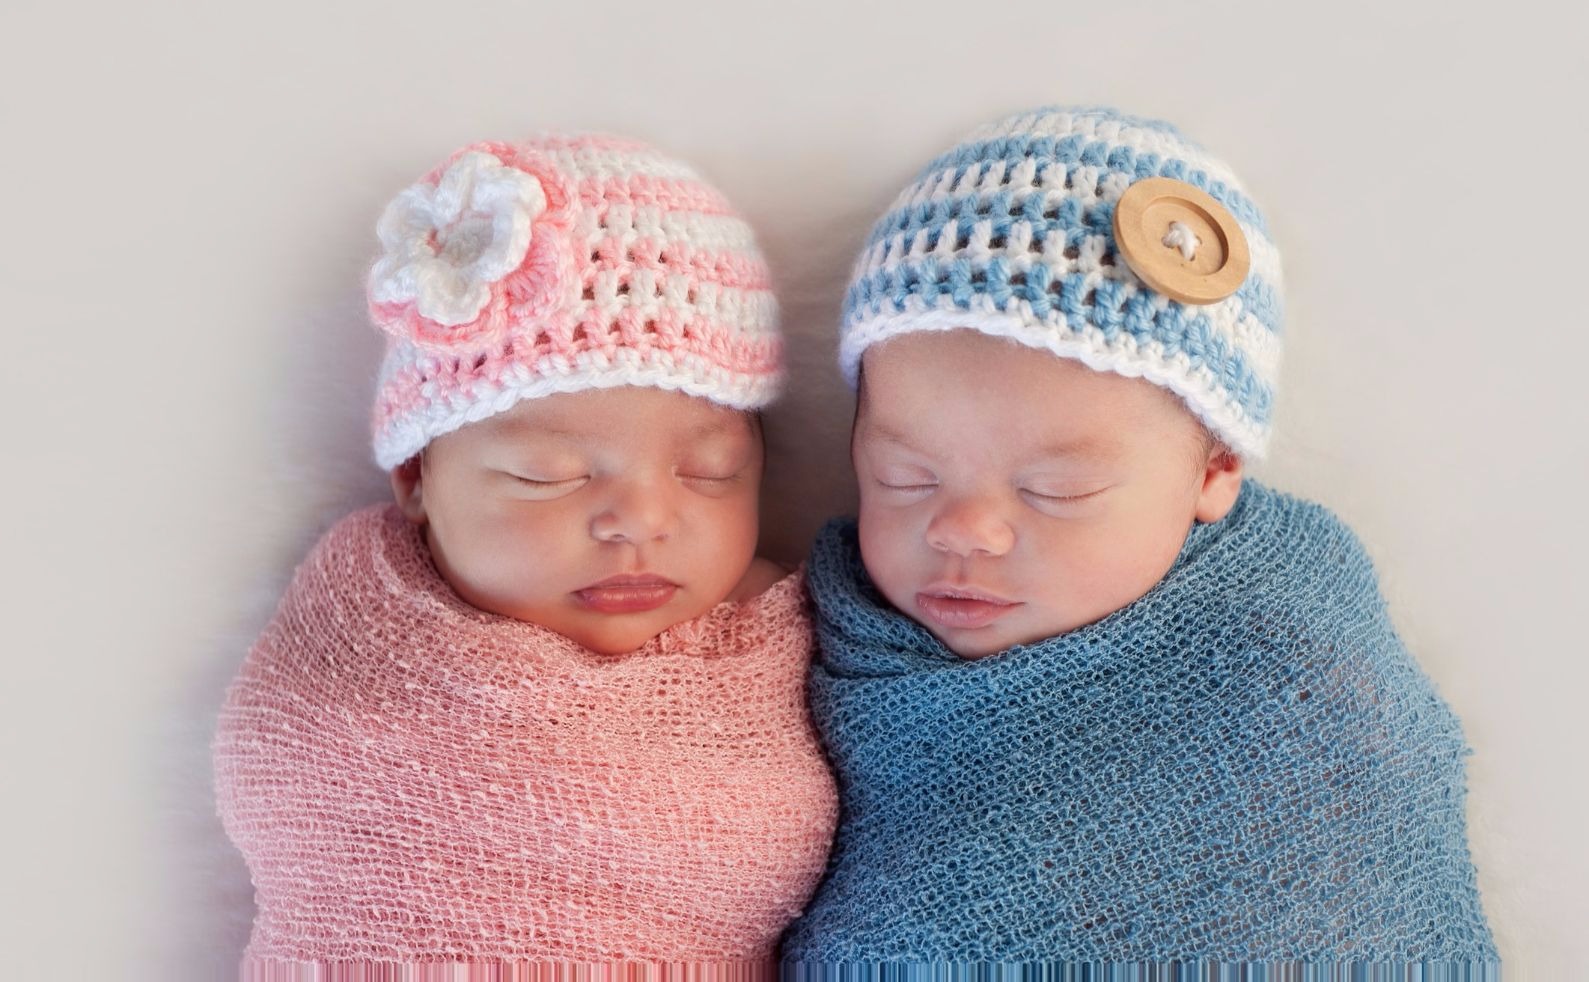 Baby clothes designer goes past pink and blue